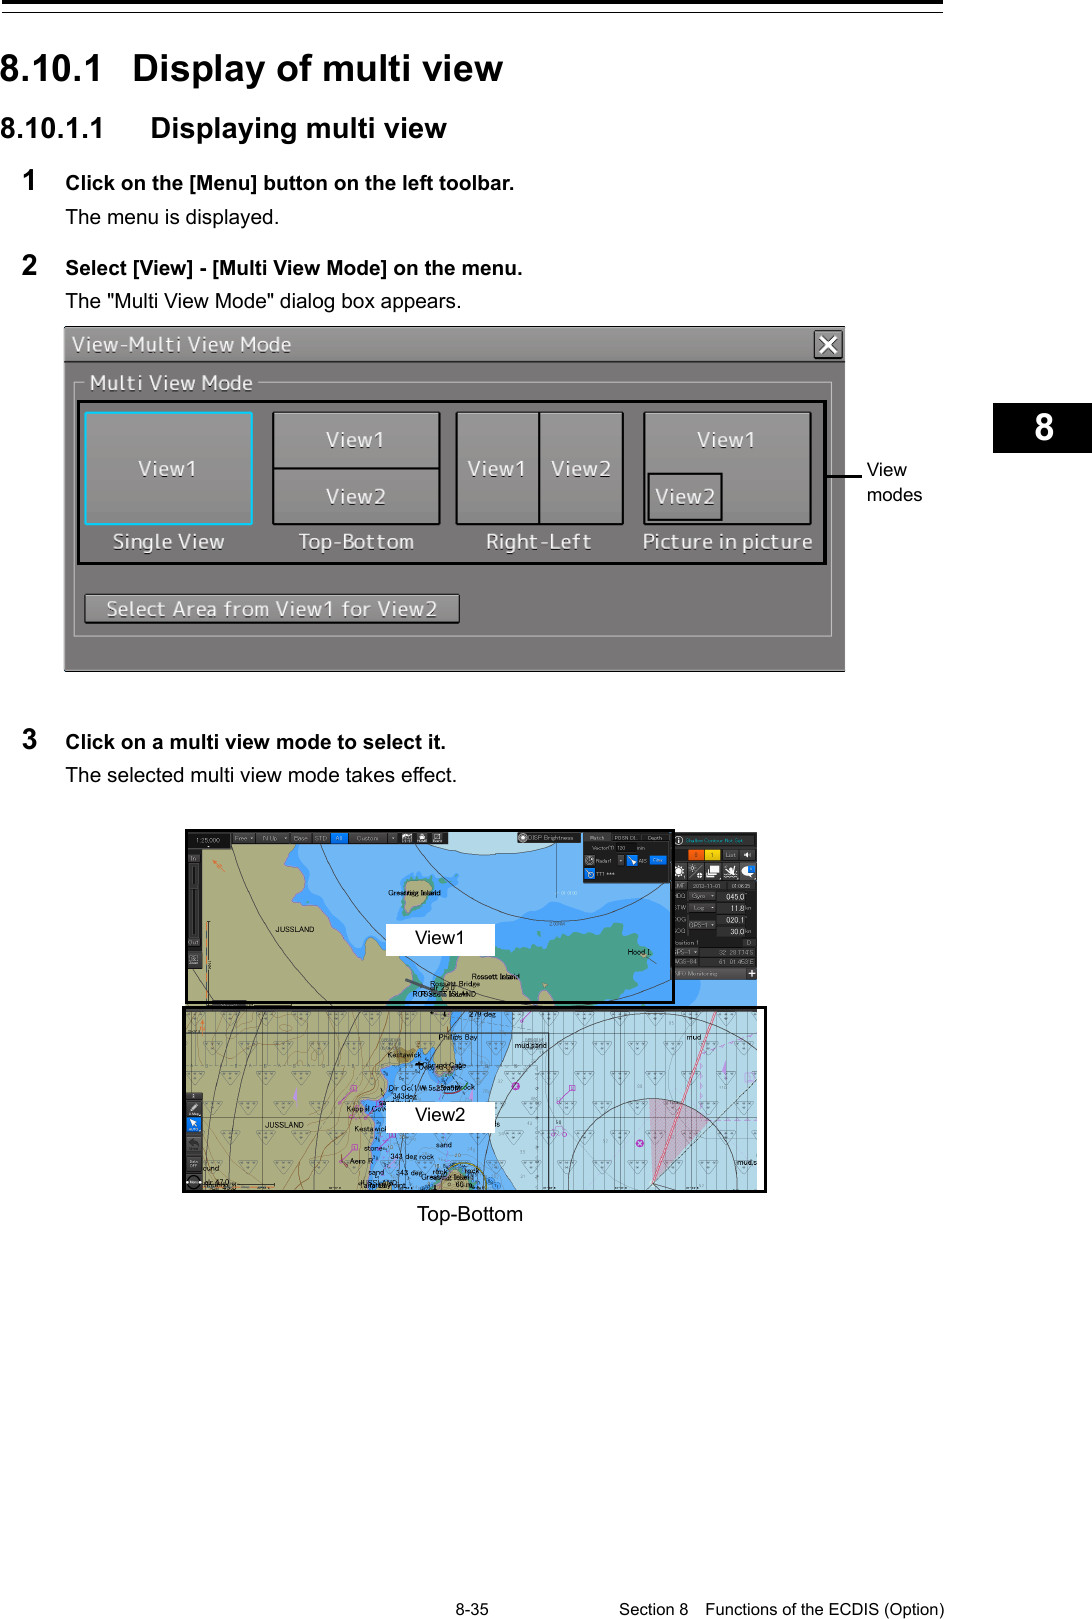   8-35 Section 8  Functions of the ECDIS (Option)    1  2  3  4  5  6  7  8  9  10  11  12  13  14  15  16  17  18  19  20  21  22  23  24  25  26  27      8.10.1  Display of multi view 8.10.1.1  Displaying multi view 1  Click on the [Menu] button on the left toolbar. The menu is displayed. 2  Select [View] - [Multi View Mode] on the menu. The &quot;Multi View Mode&quot; dialog box appears.   3  Click on a multi view mode to select it. The selected multi view mode takes effect.   Top-Bottom    View modes  View1 View2   